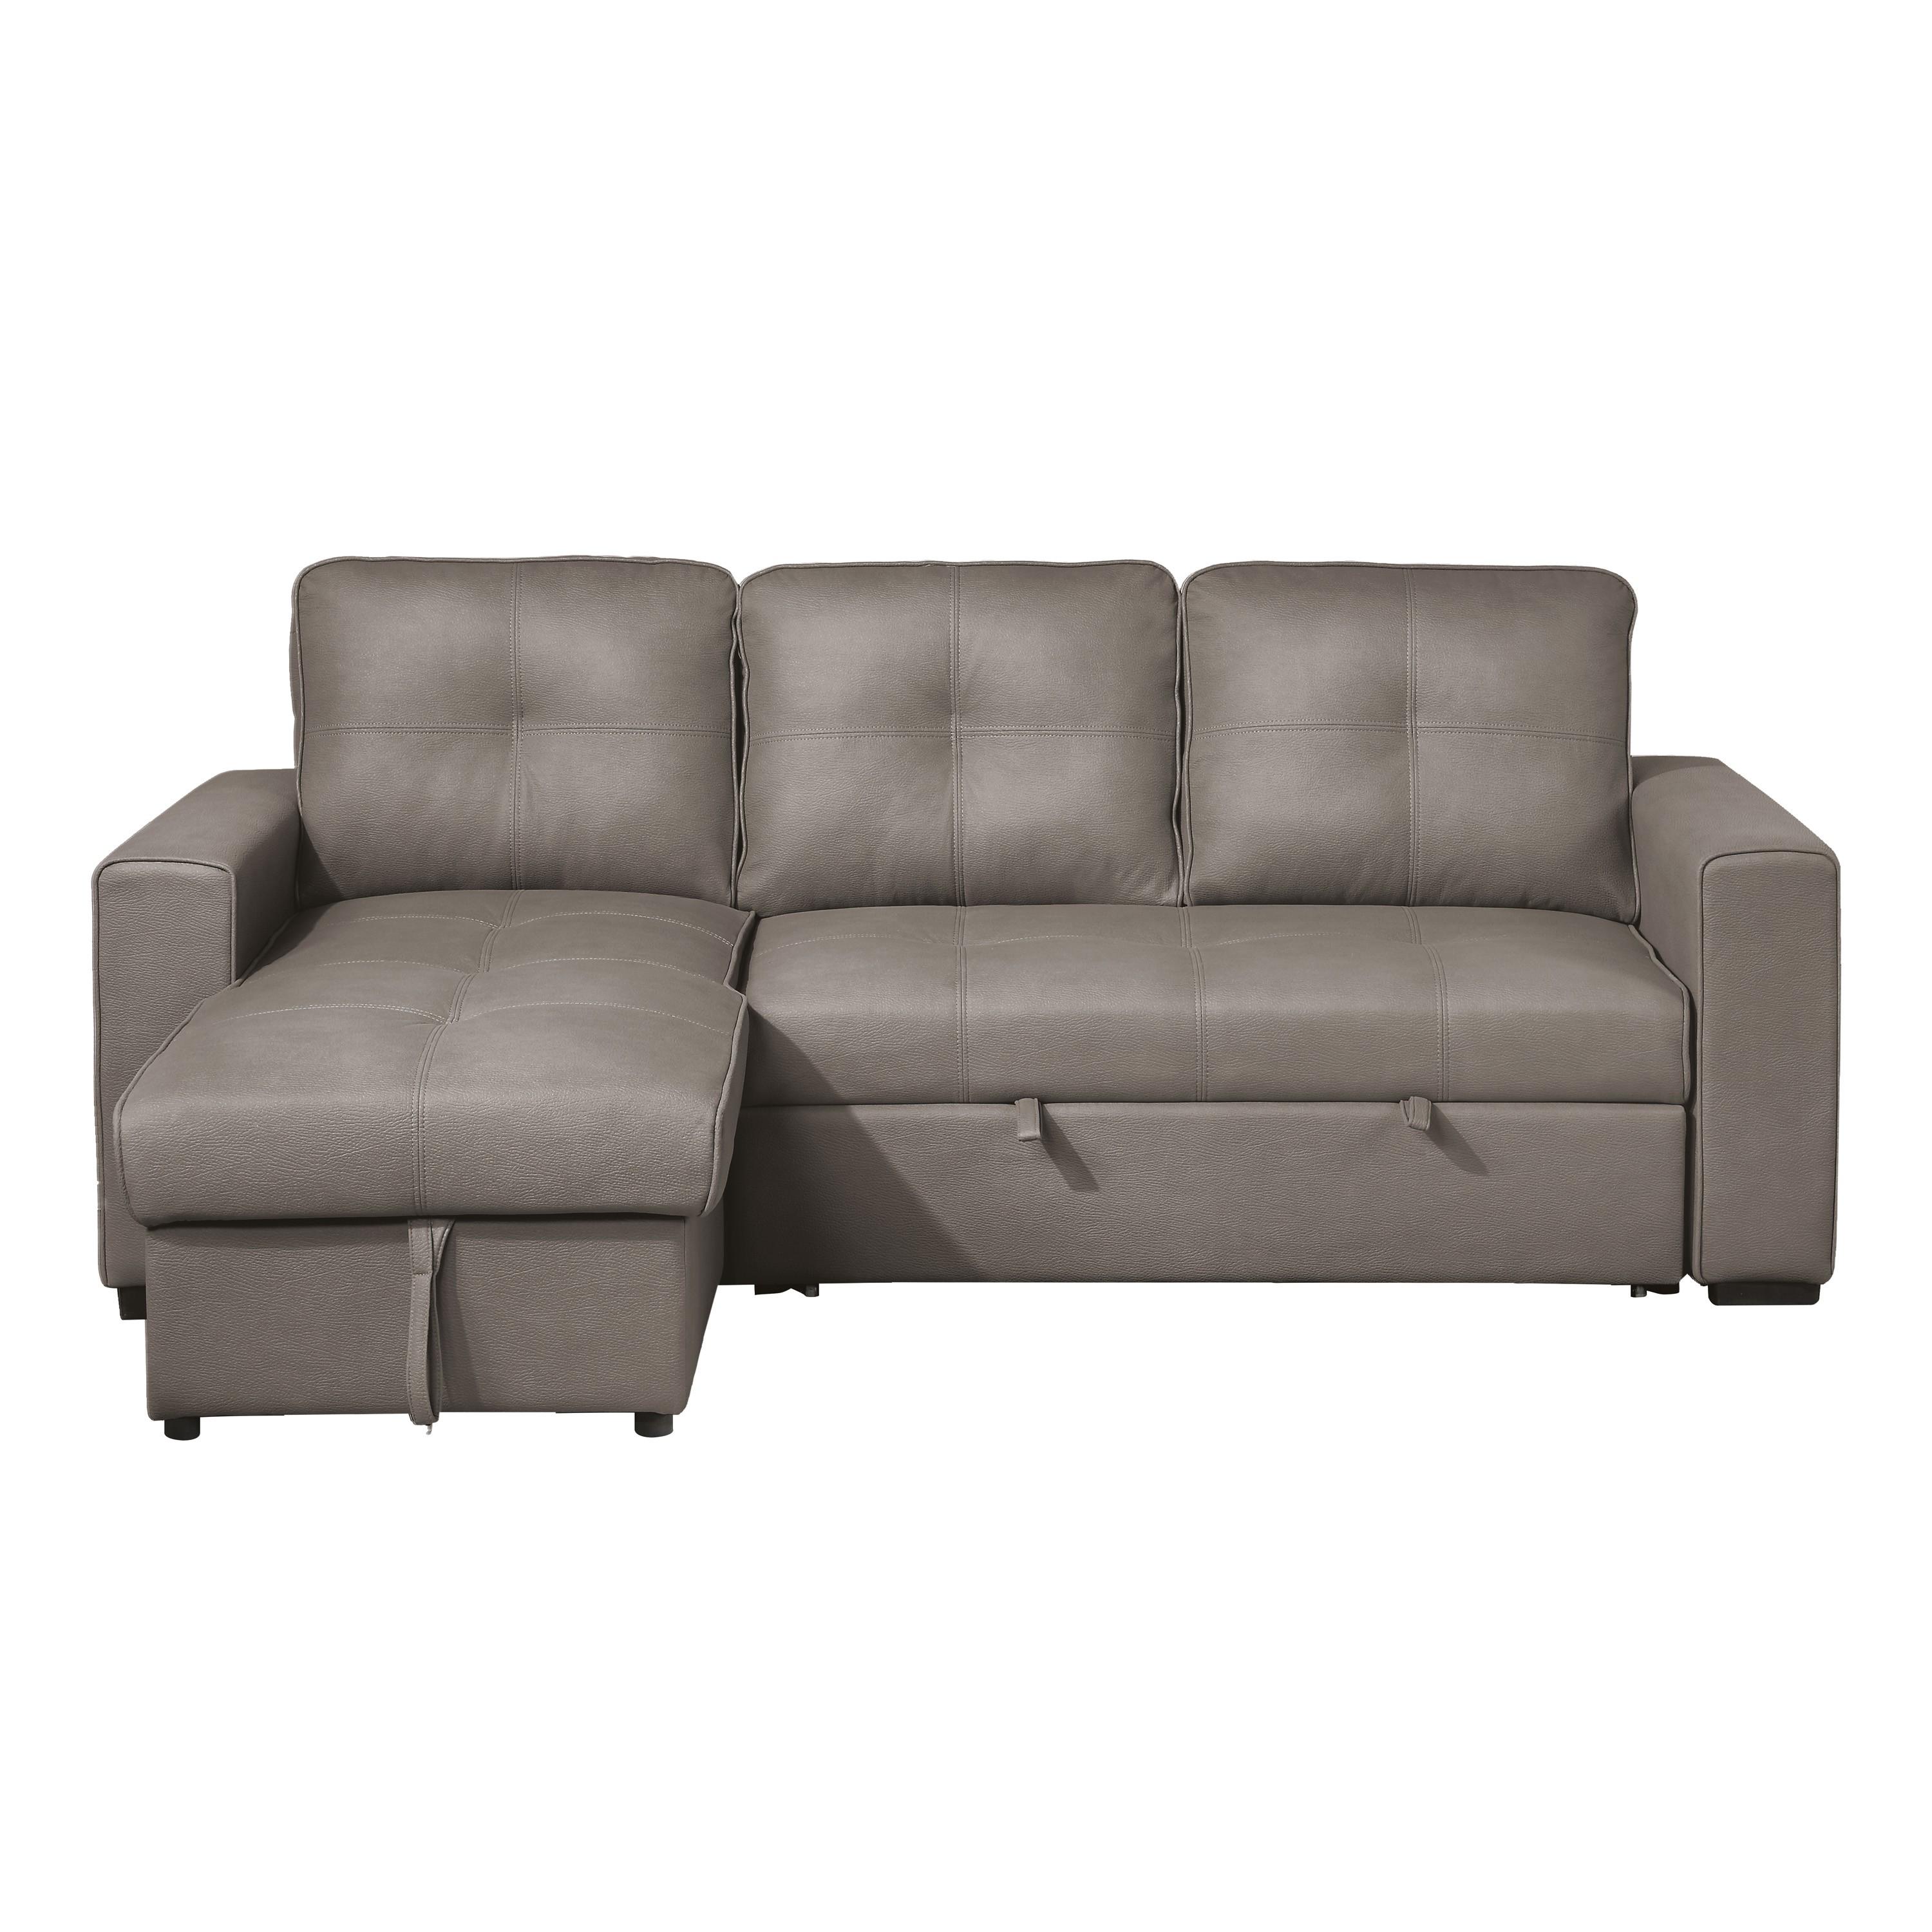 Casual Sectional Sofa 9569NFTP*SC Magnus 9569NFTP*SC in Taupe Microfiber